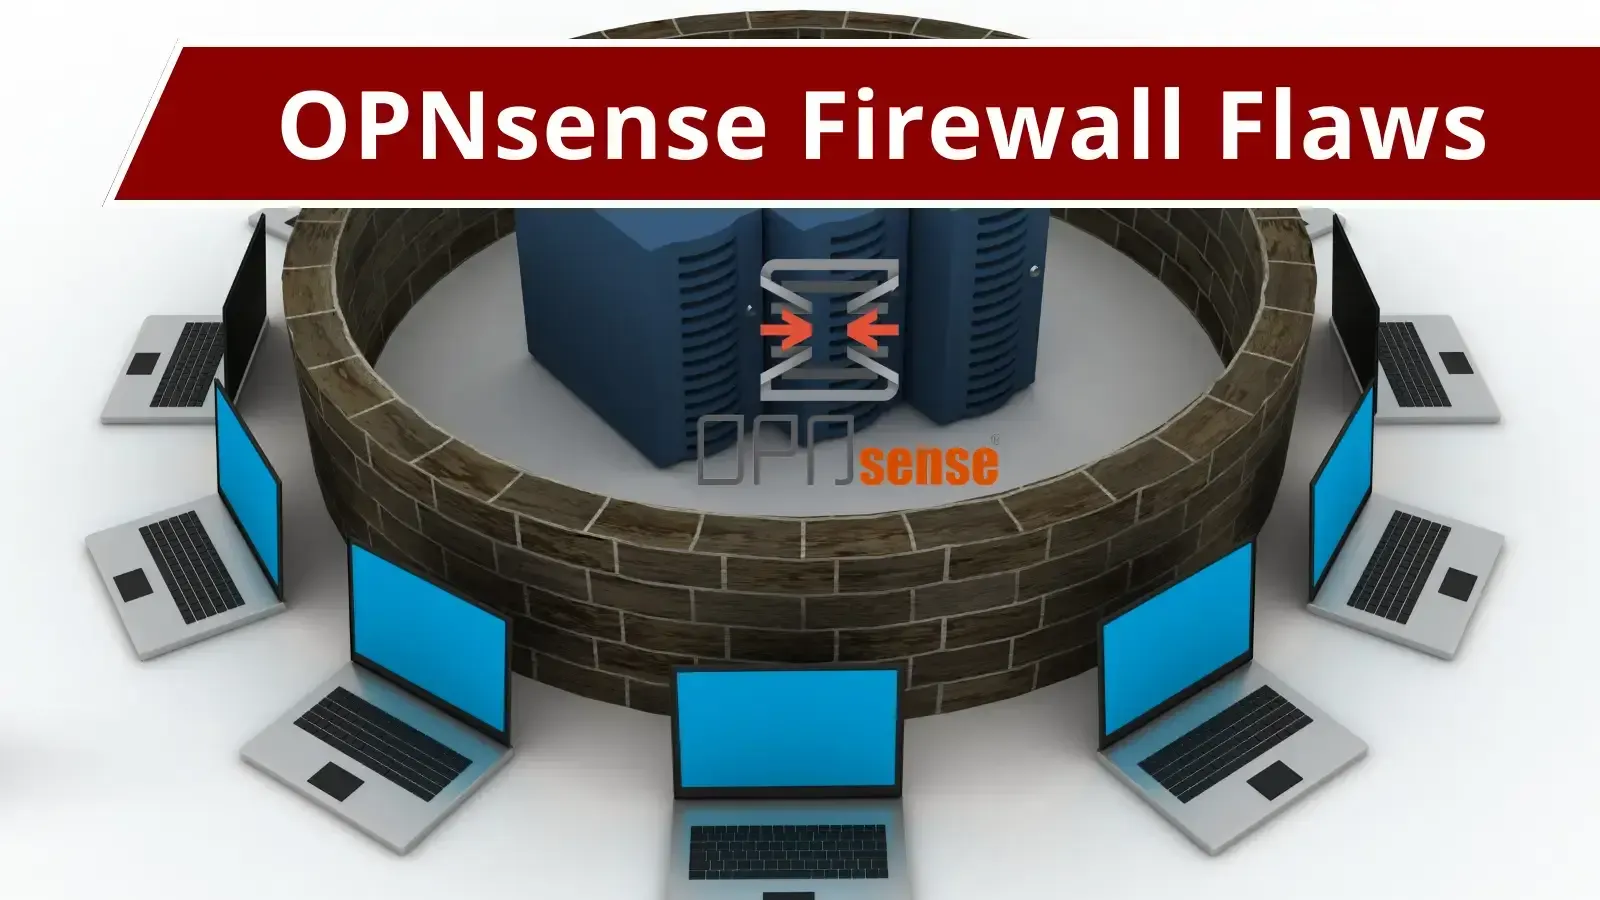 OPNsense Firewall Flaws Let Attackers Employ XSS to Escalate Privileges